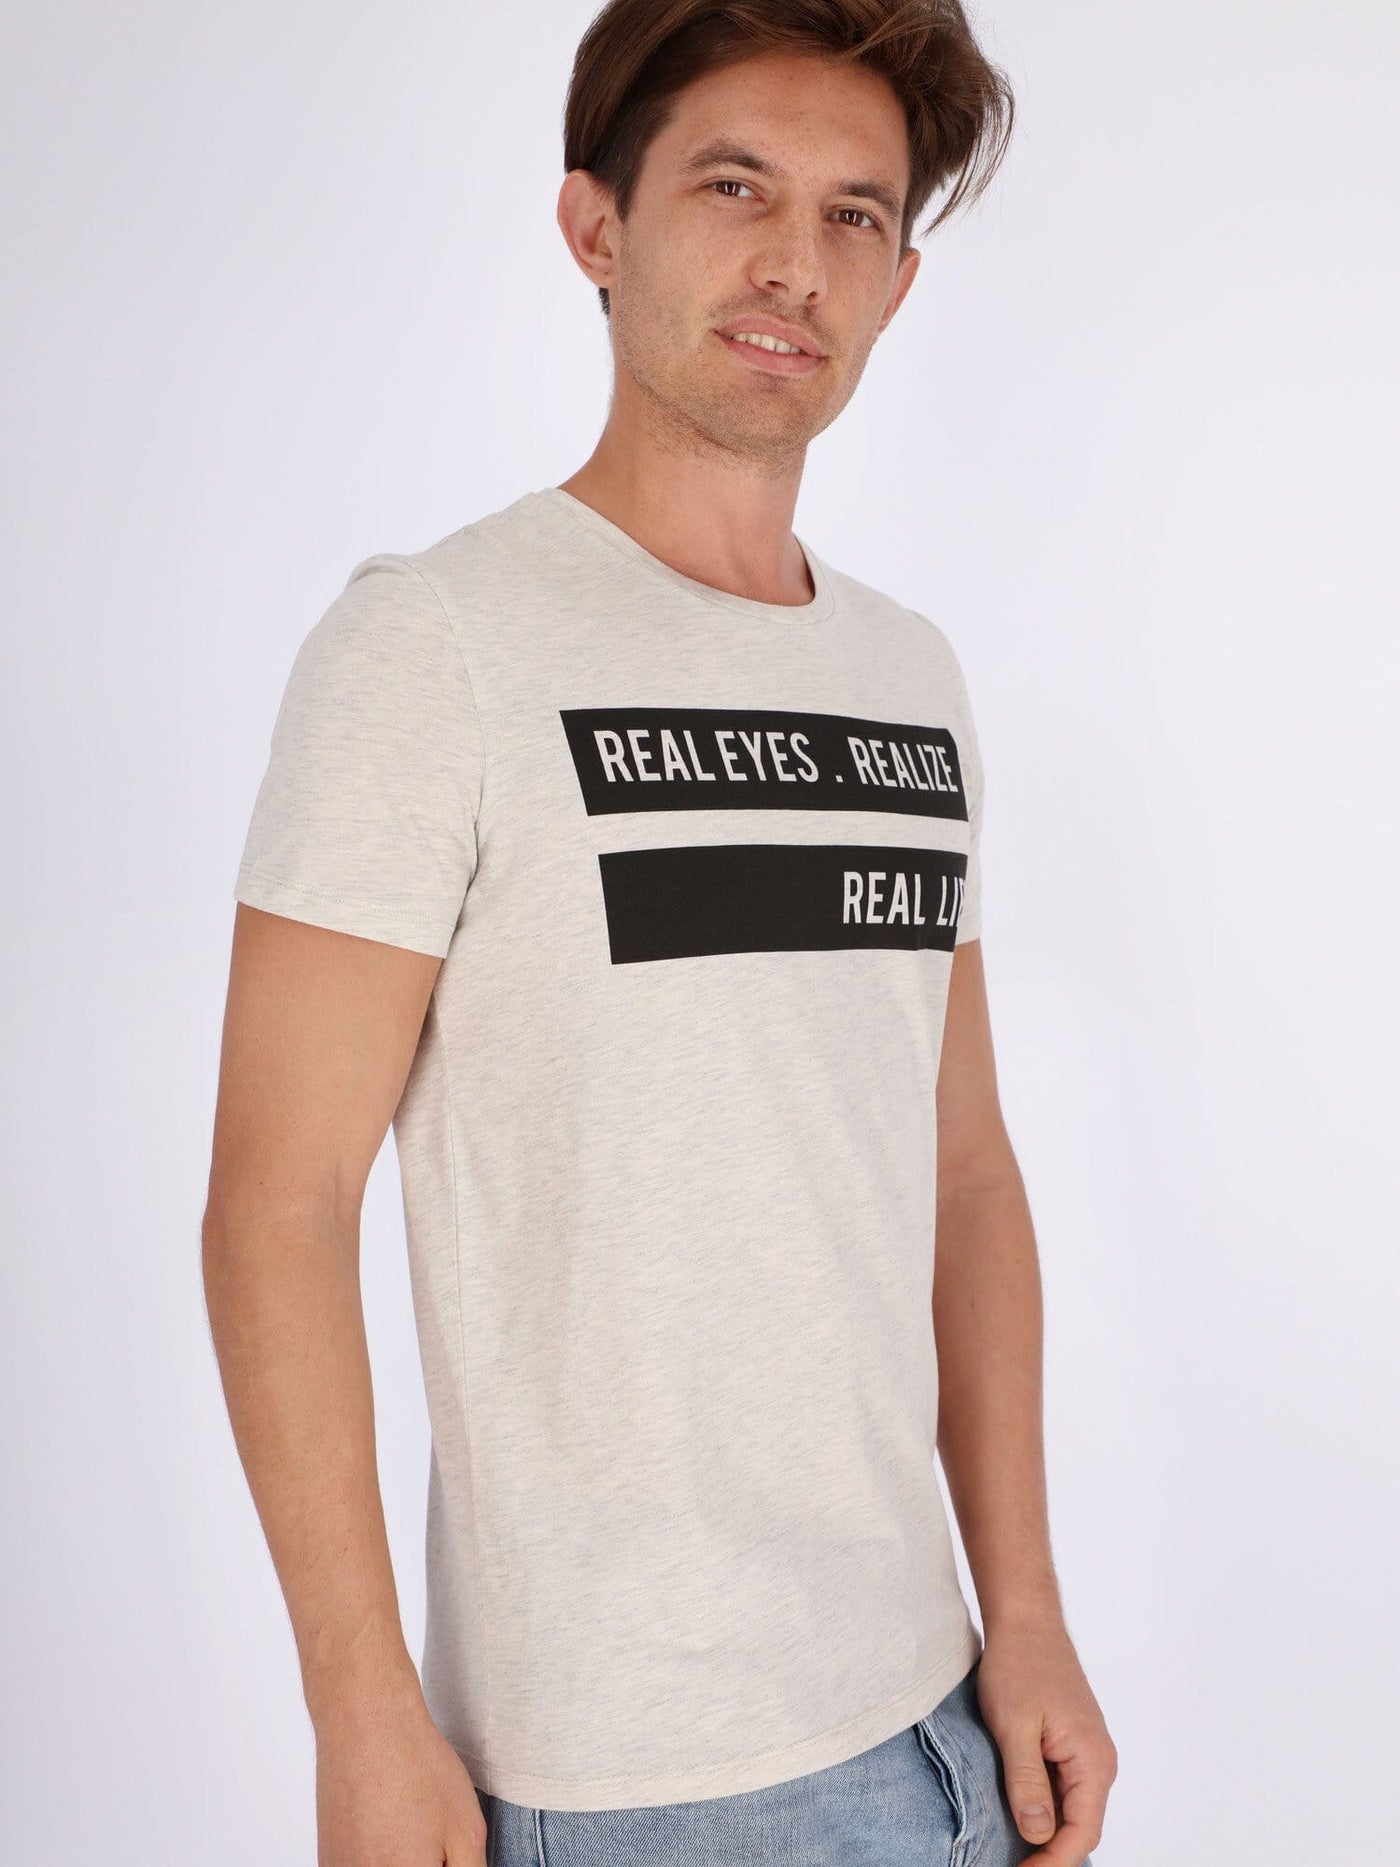 OR T-Shirts Front Text Print Short Sleeve Round Neck T-Shirt